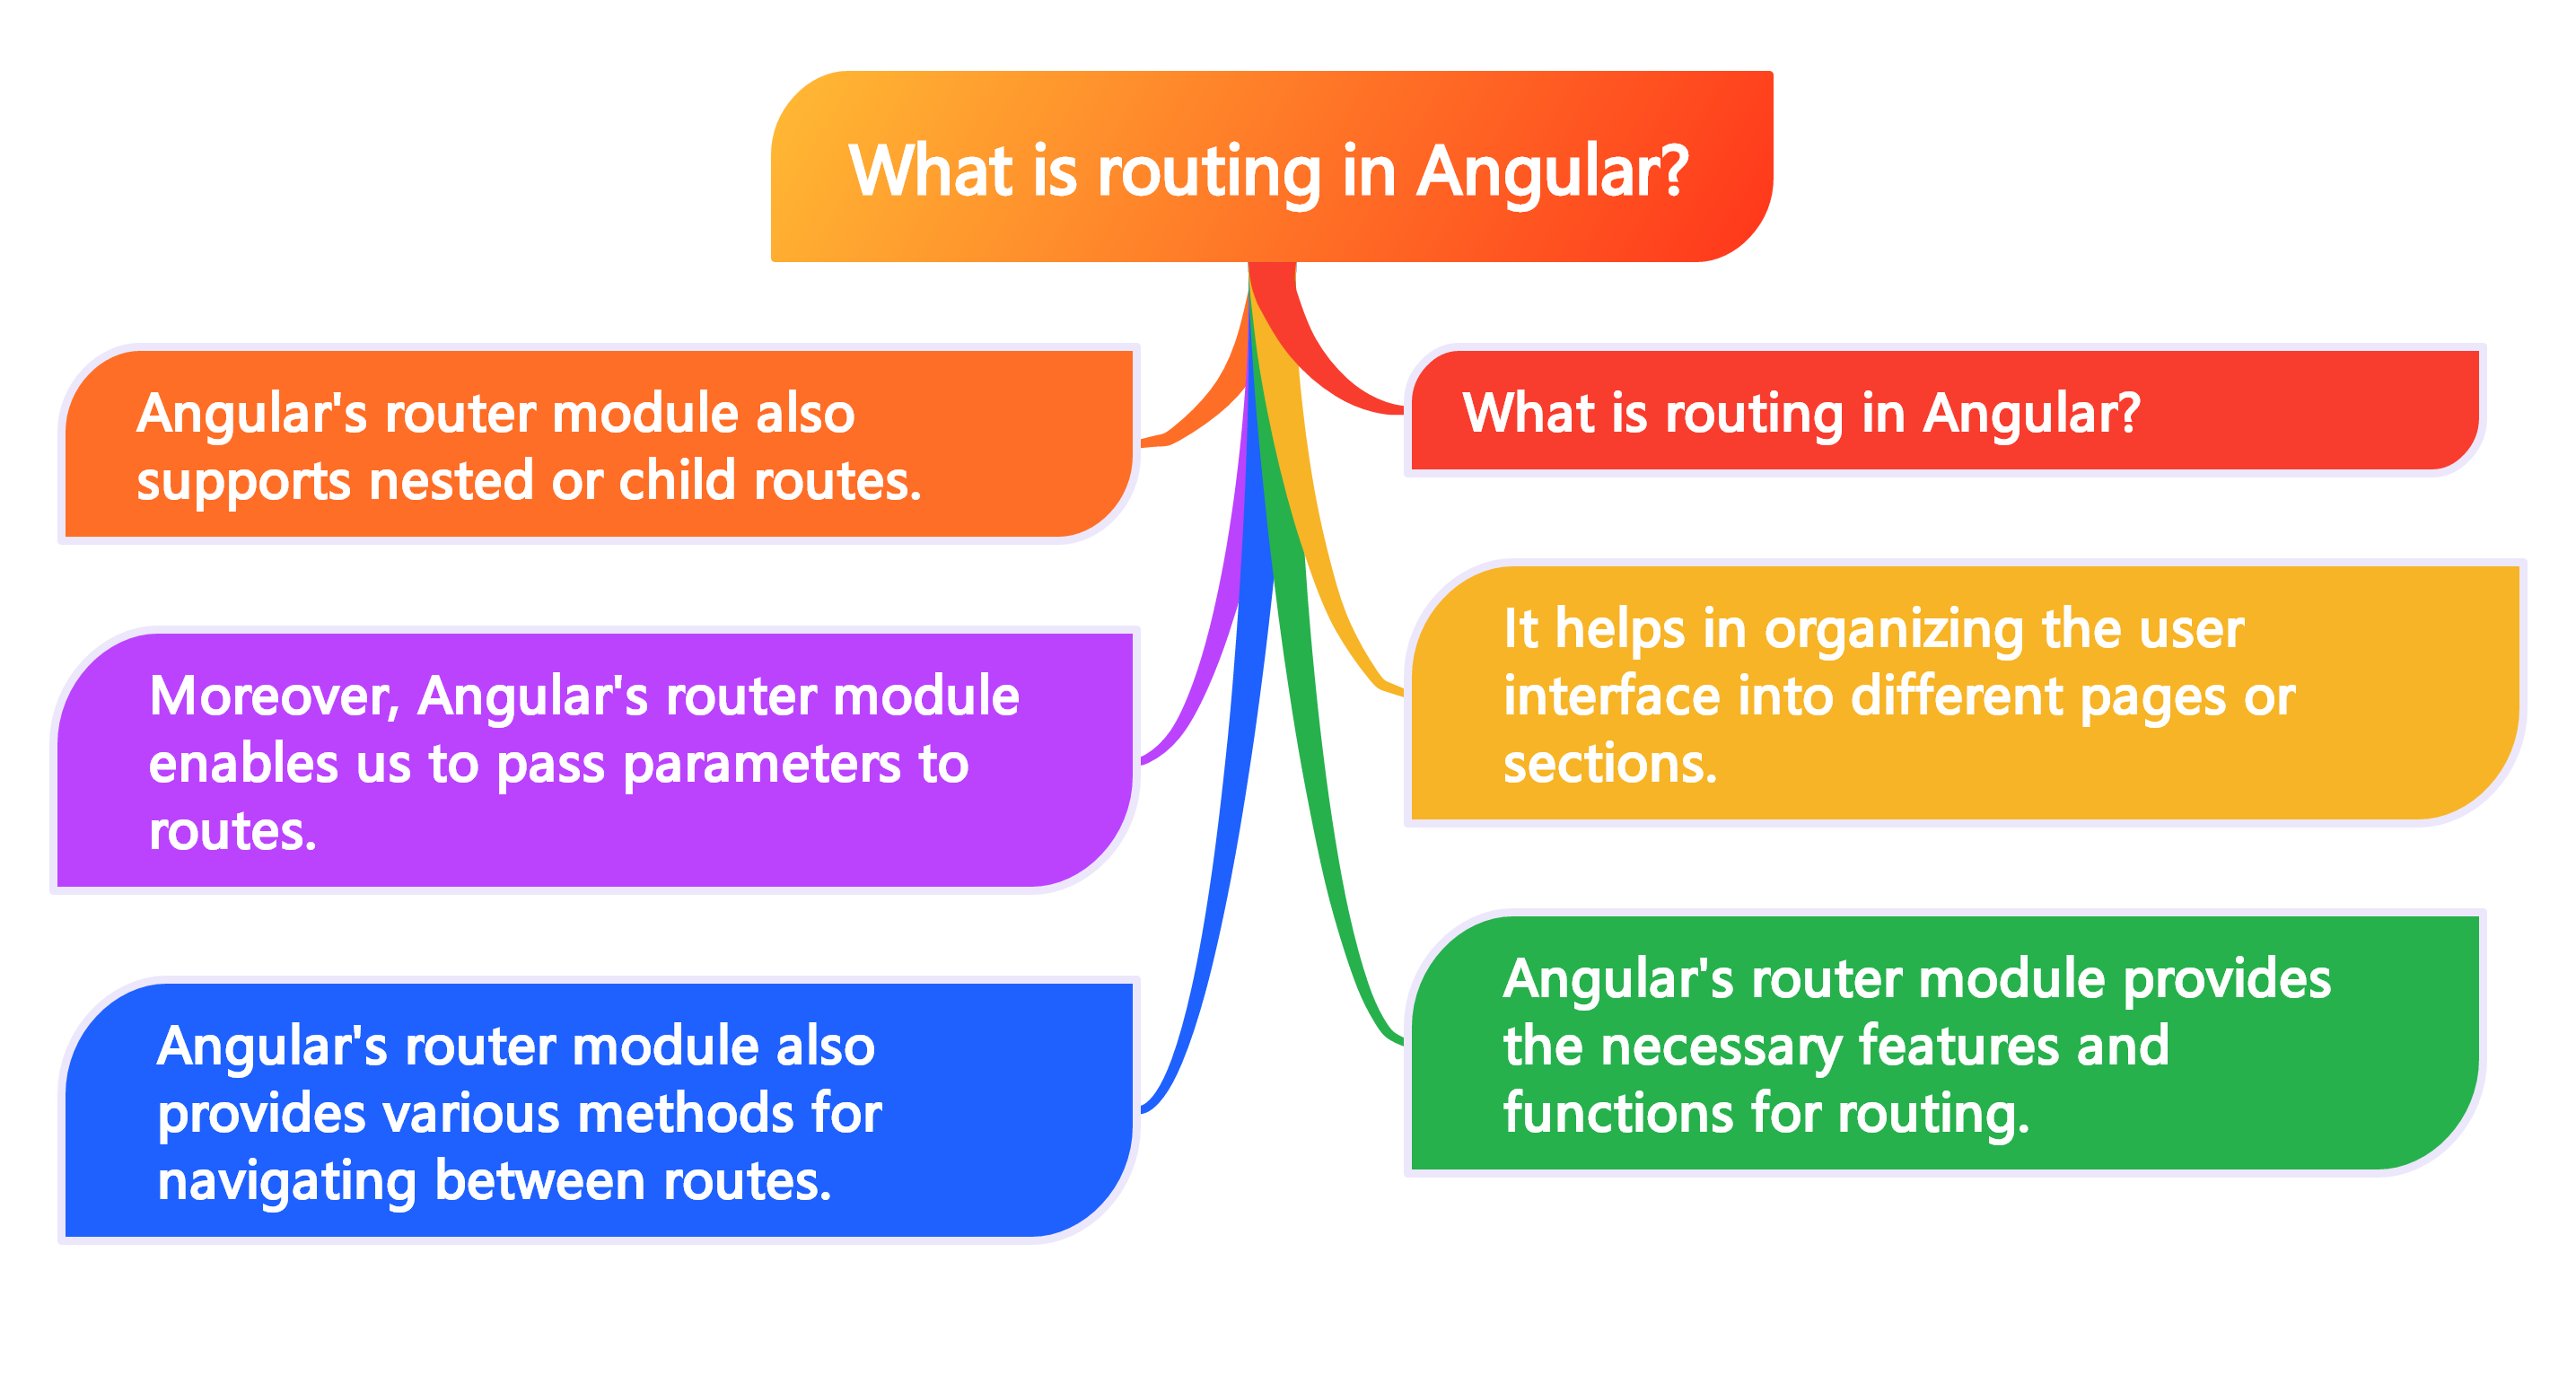 What is routing in Angular